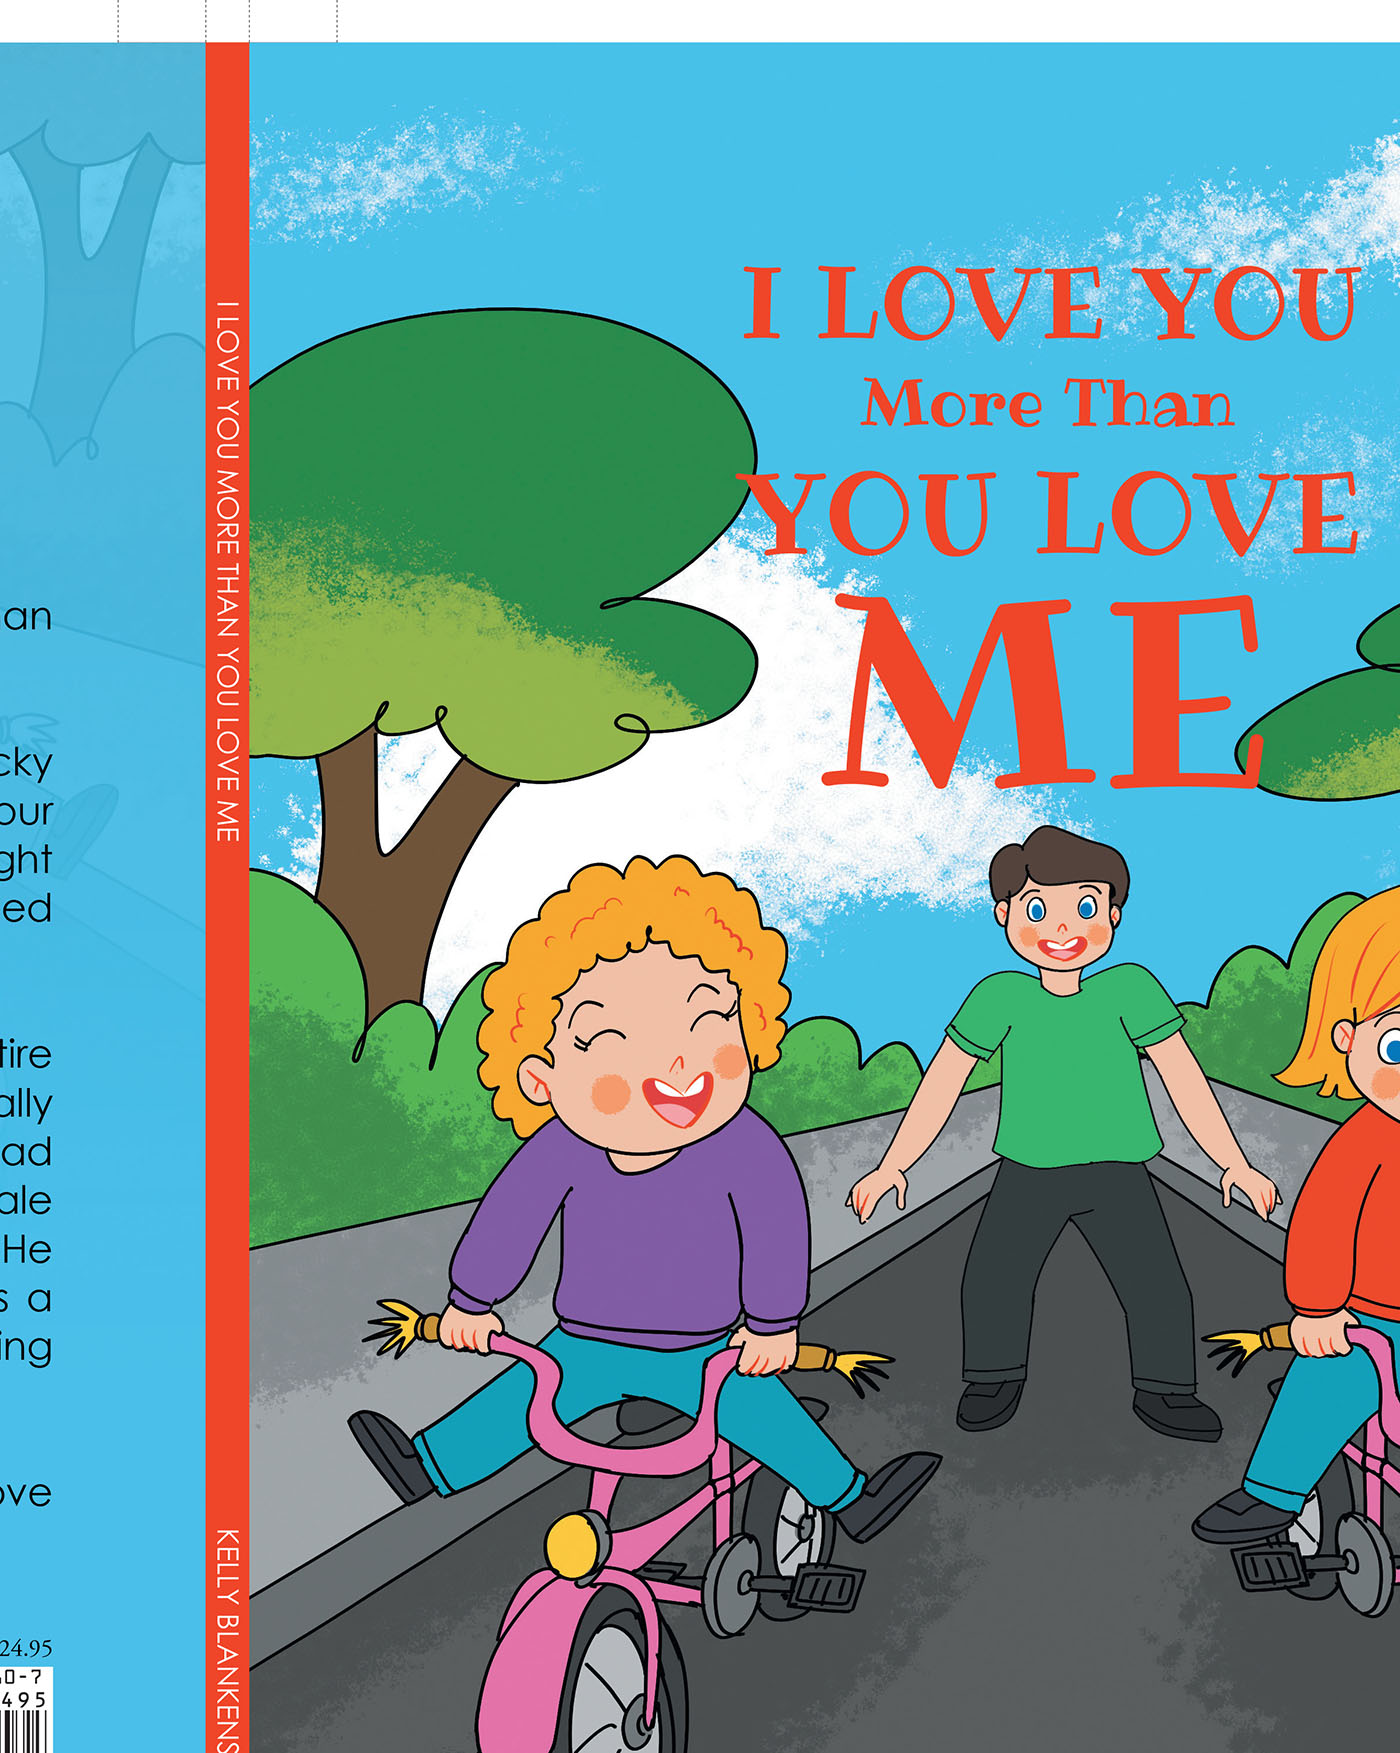 Kelly Blankenship’s Newly Released “I Love You More Than You Love Me” is a Sweet Lyrical Story That Explores the Deep Connection Between Fathers and Daughters